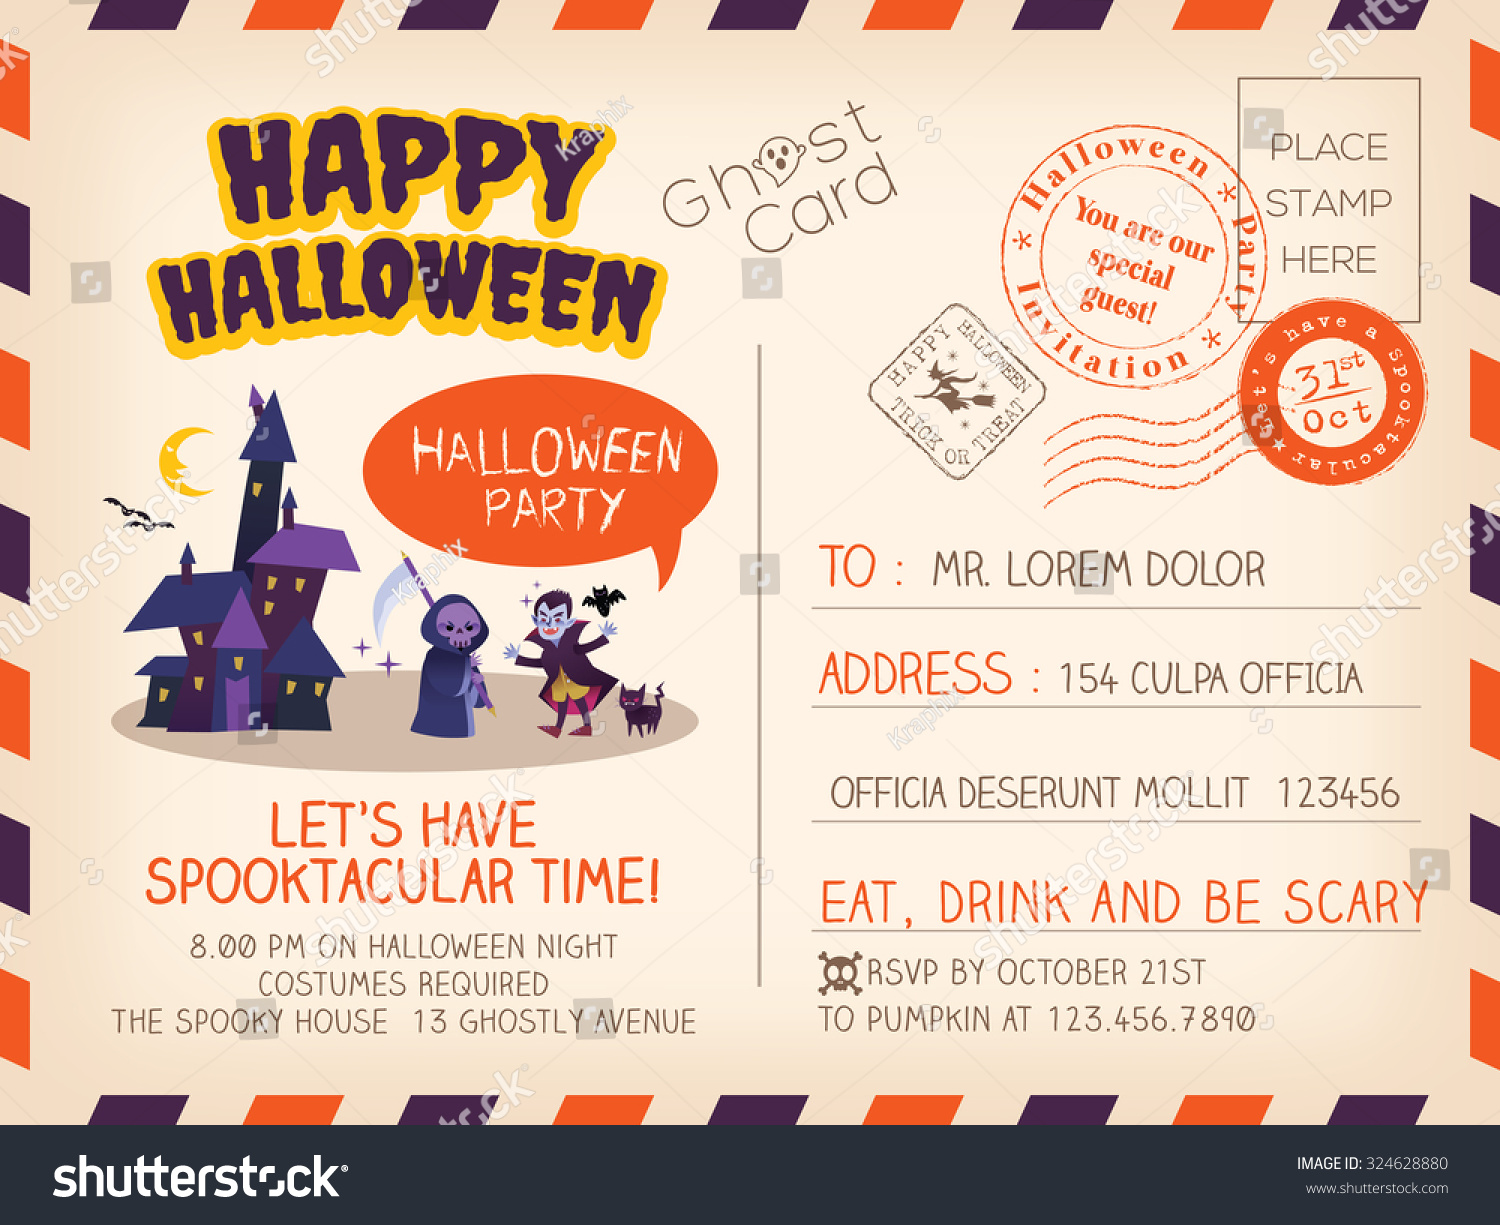 Halloween Party Invitations Layout 2